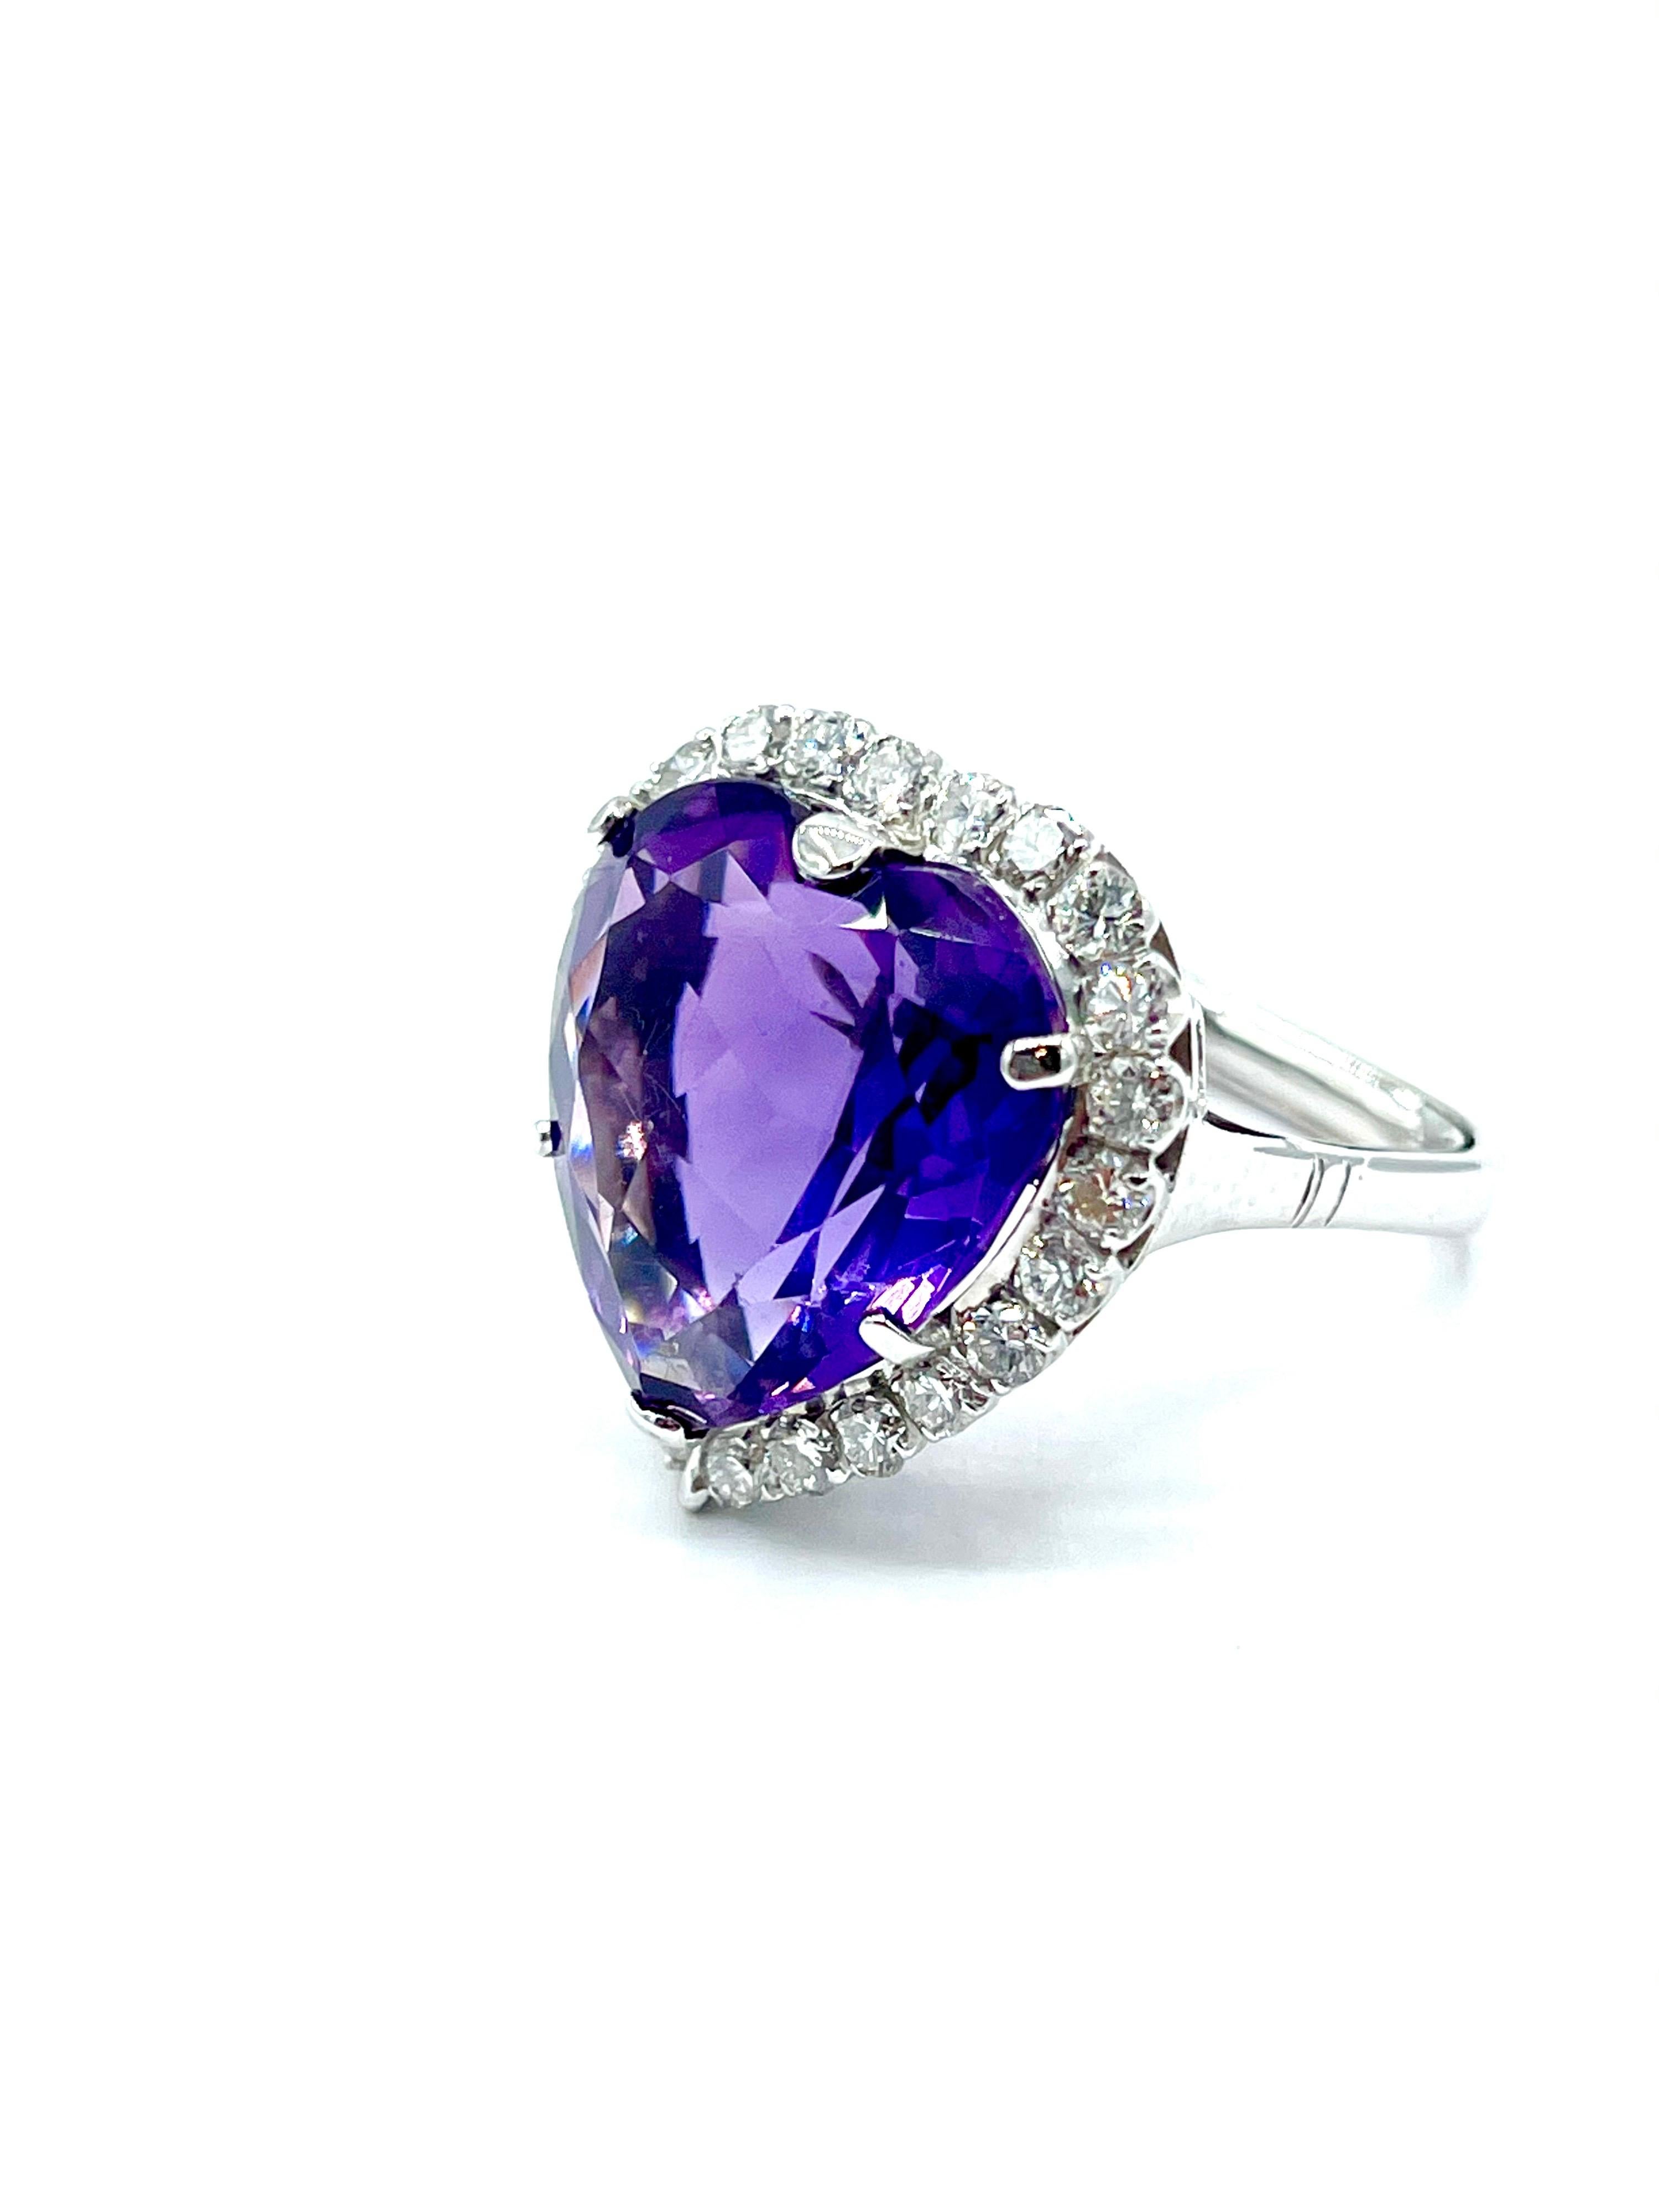 Heart Cut 12.88 Carat Heart Shape Amethyst and Diamond Ring For Sale